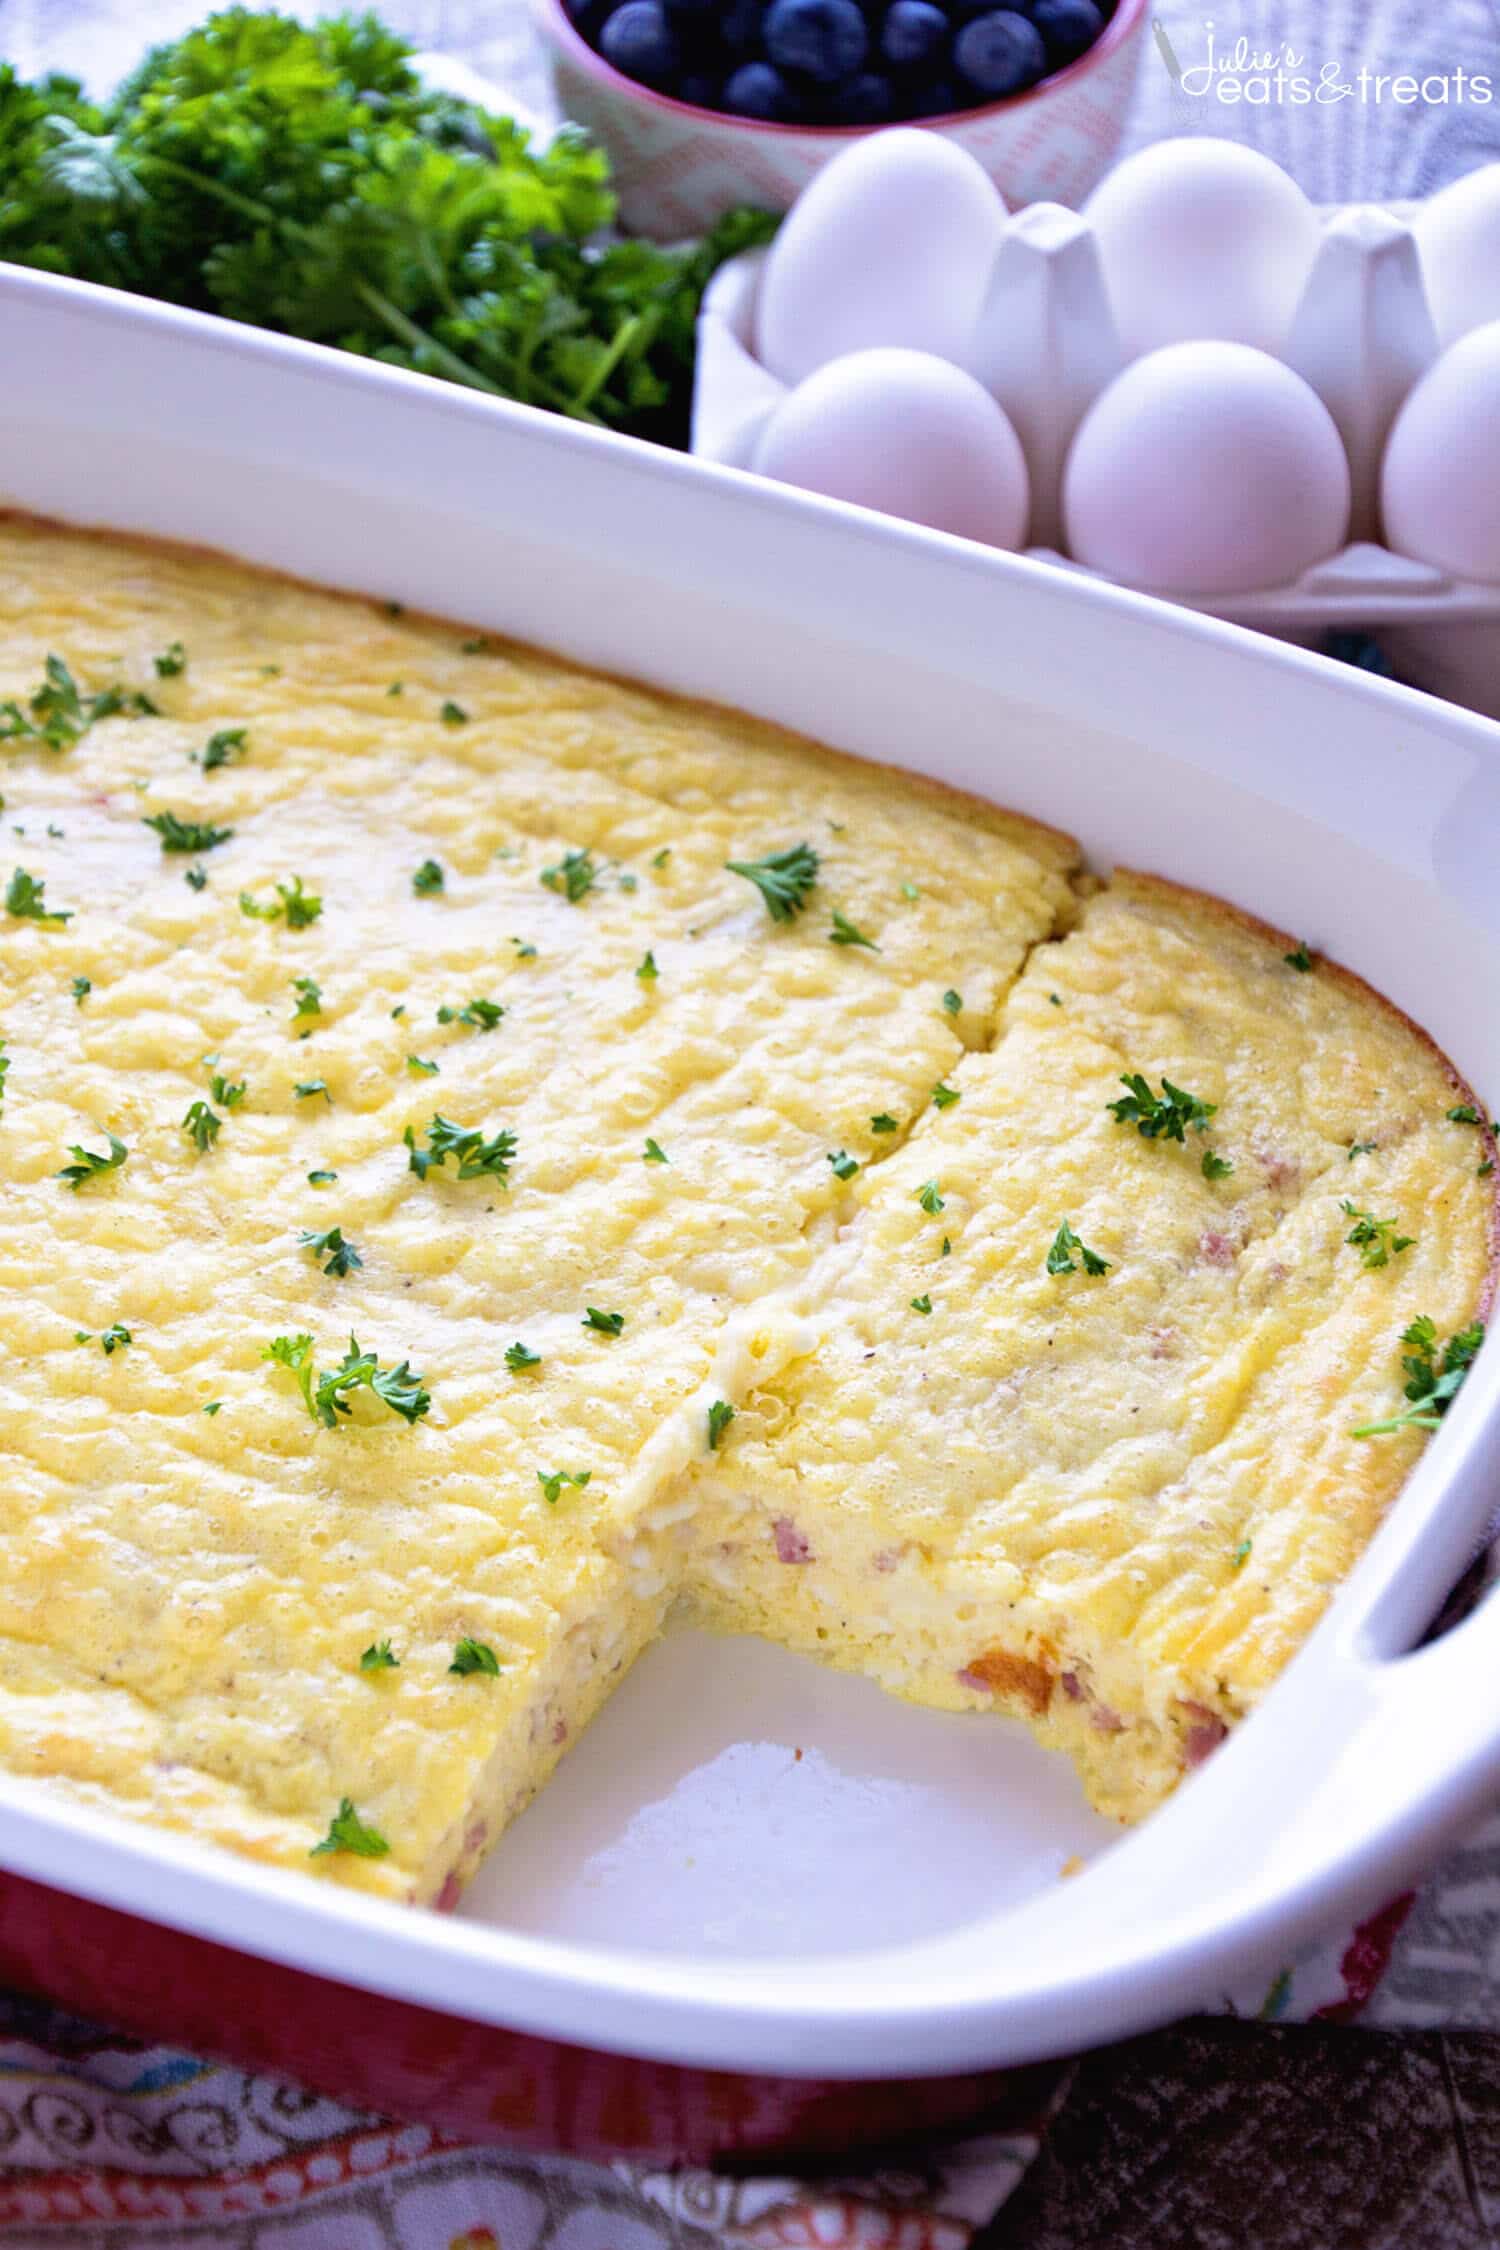 Cheesy Ham Oven Baked Omelet Recipe ~ Light & Fluffy Omelet That is Baked and Stuffed Full of Ham & Cheese! Perfect for Brunch or Breakfast Recipe!